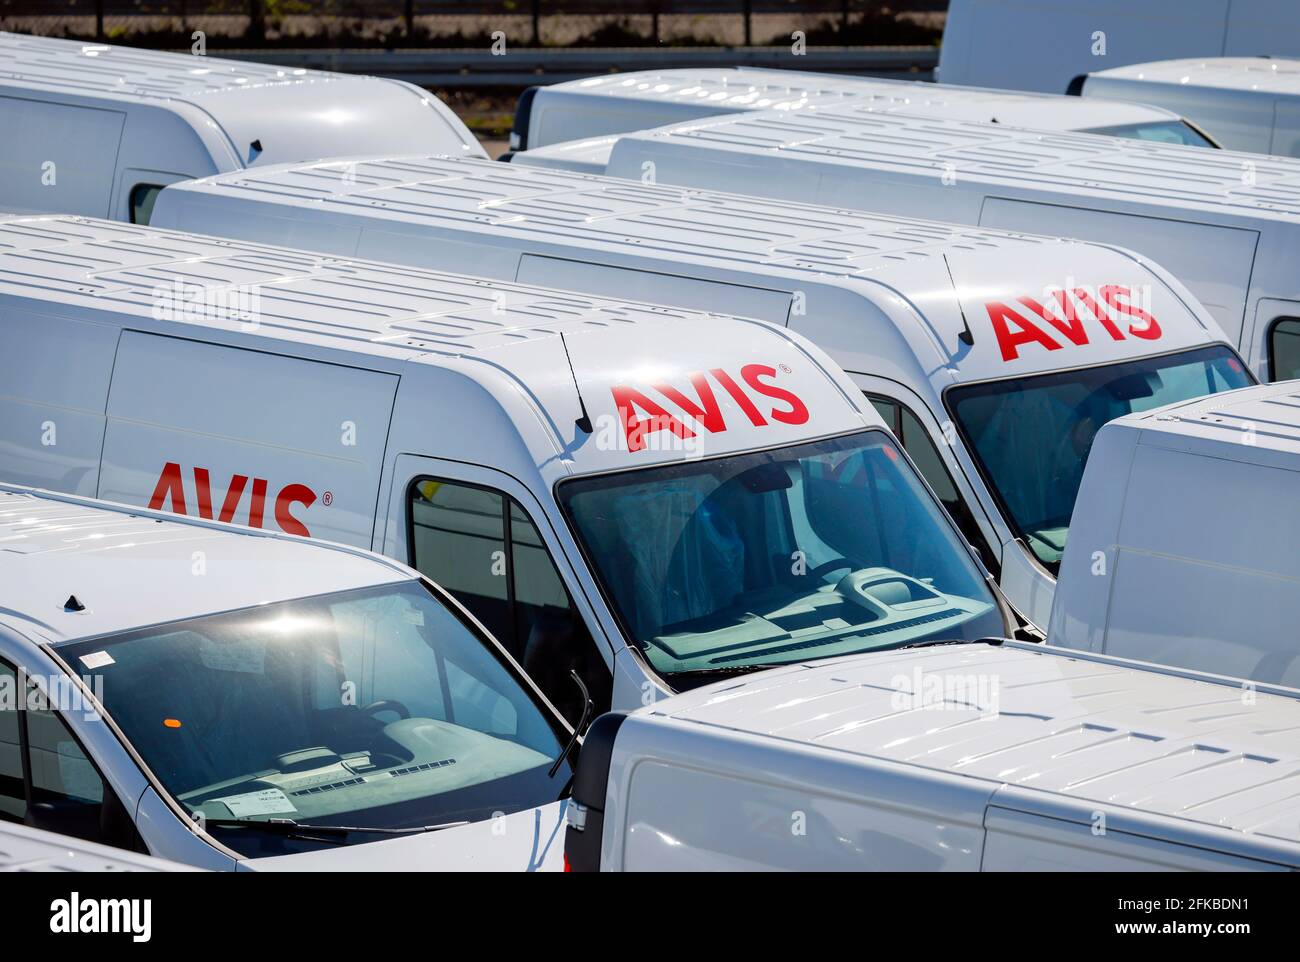 Avis Rental High Resolution Stock Photography and Images - Alamy